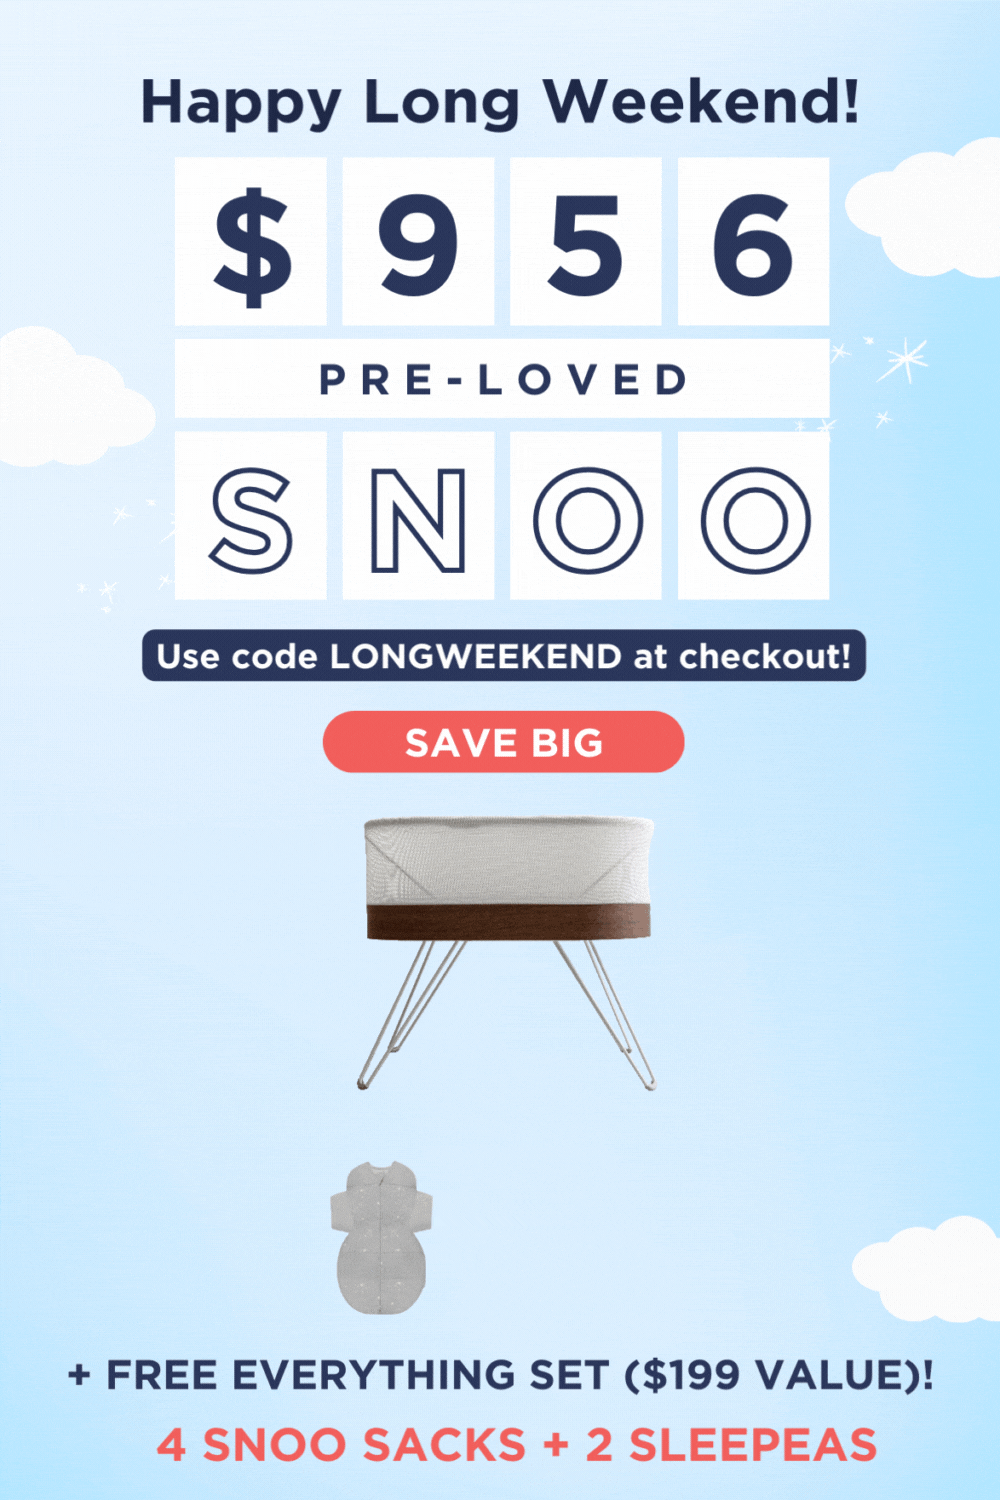 Happy Long Weekend! \\$956 Pre-Loved SNOO. Use code LONGWEEKEND at checkout! SAVE BIG + FREE GIFT! 4 SNOO Sacks + 2 Sleepeas Everything Set (\\$199 VALUE)